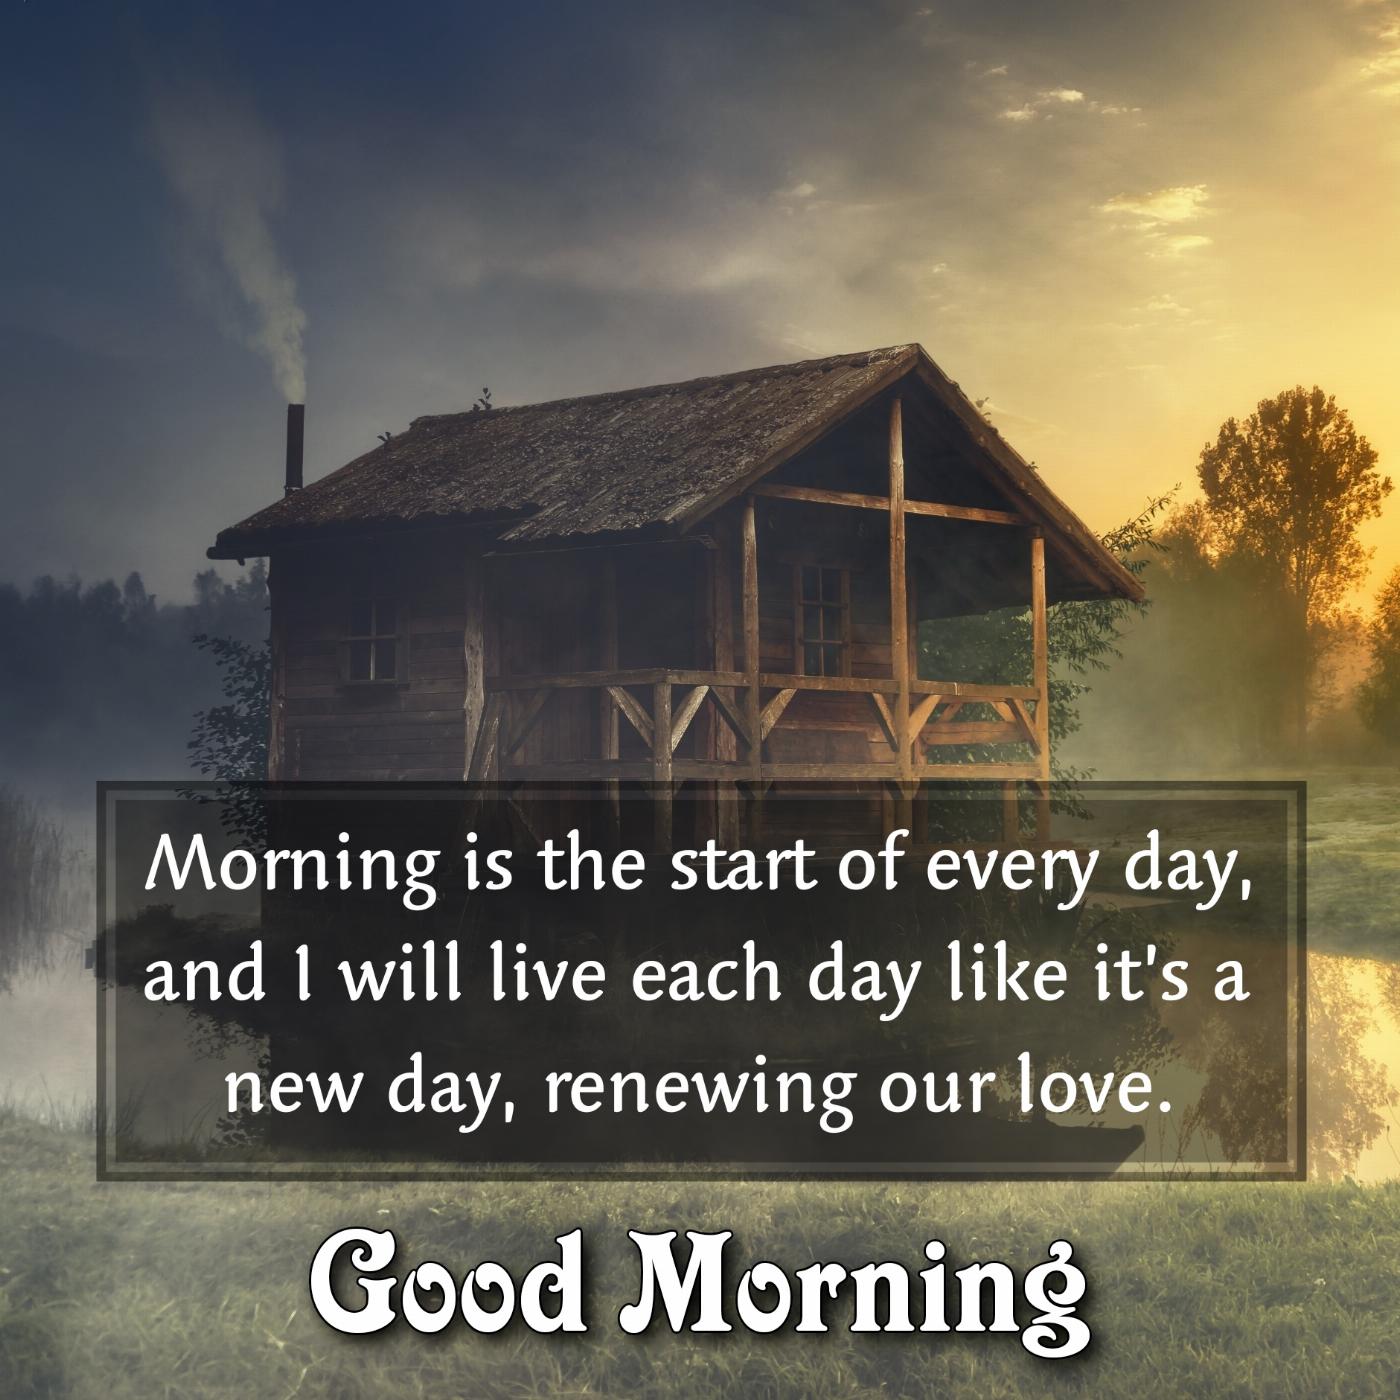 Morning is the start of every day